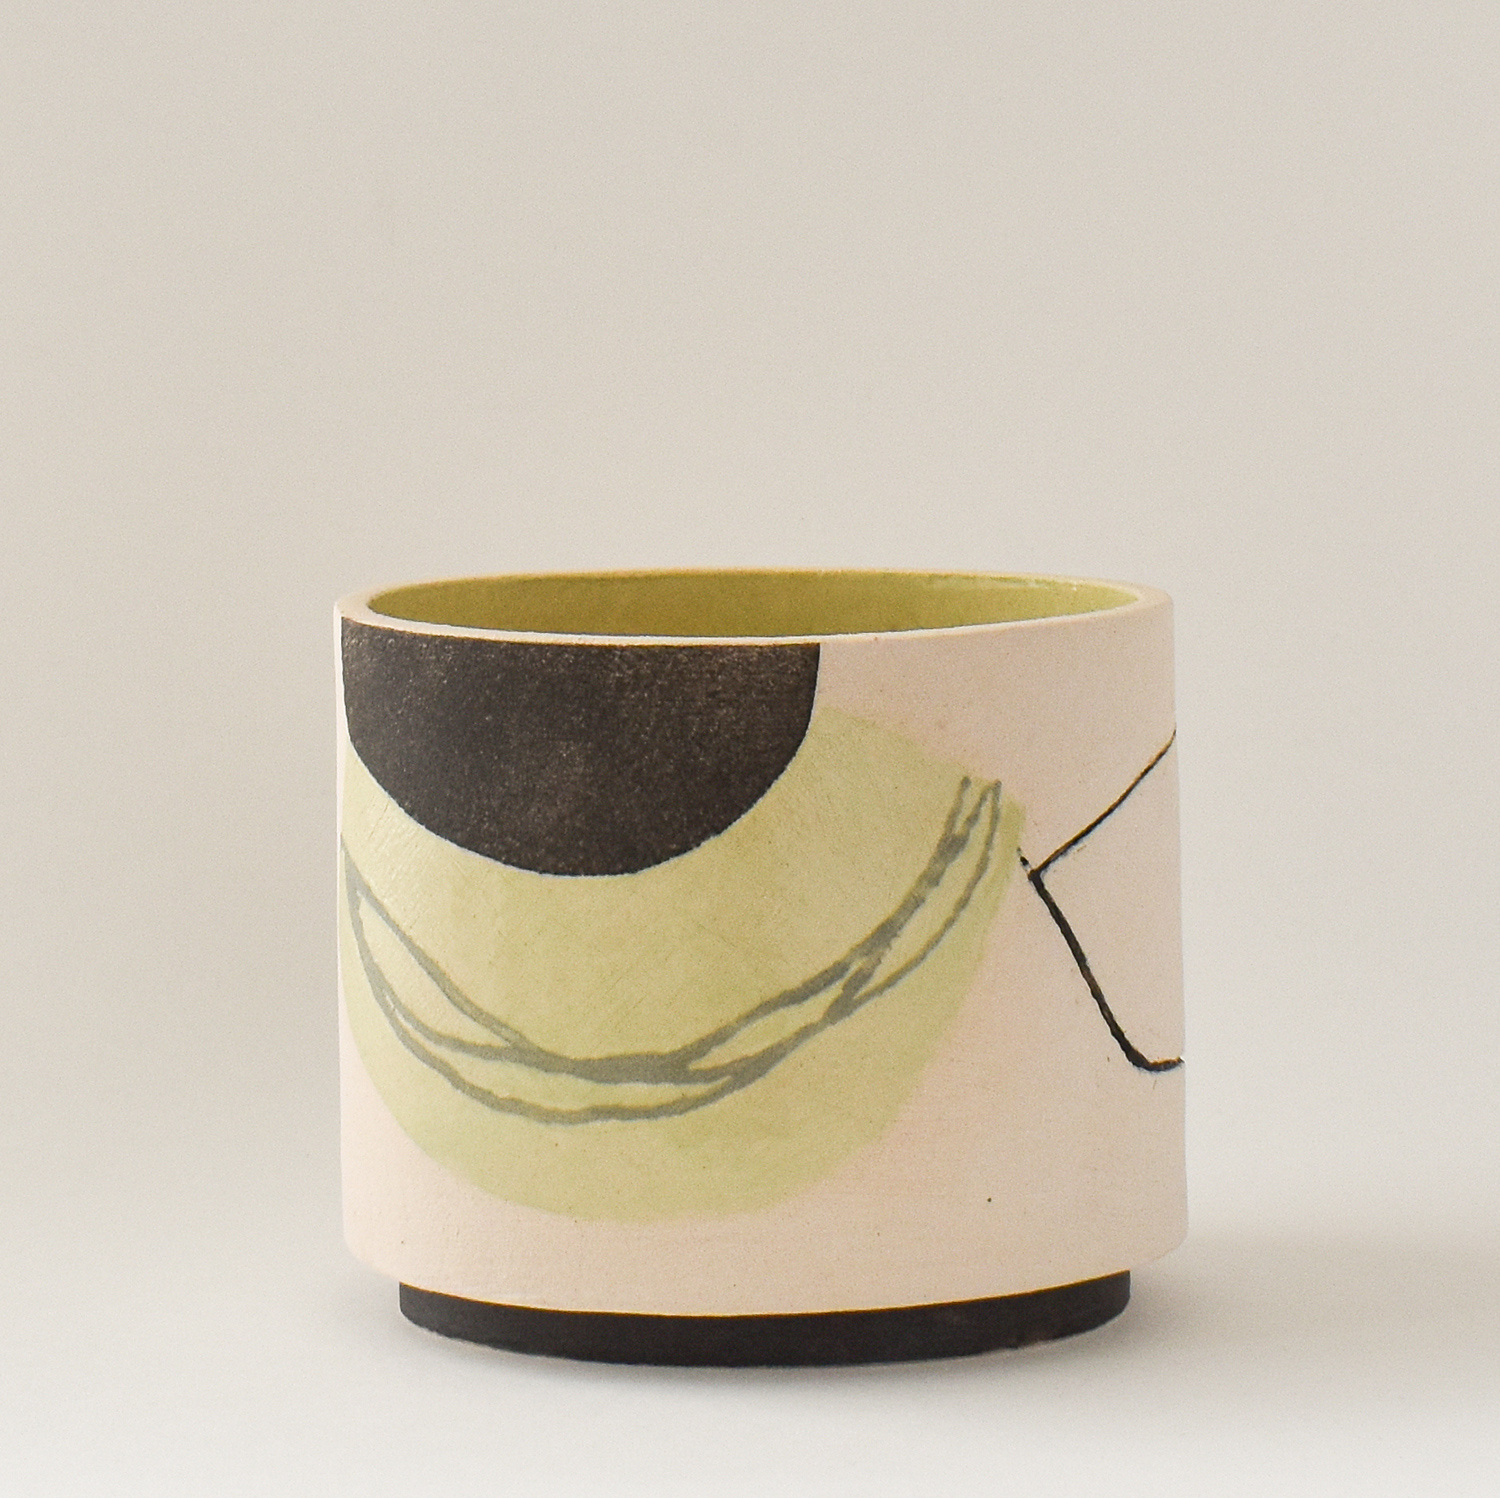 Oval Vessel with Foot, medium by Louise McNiff